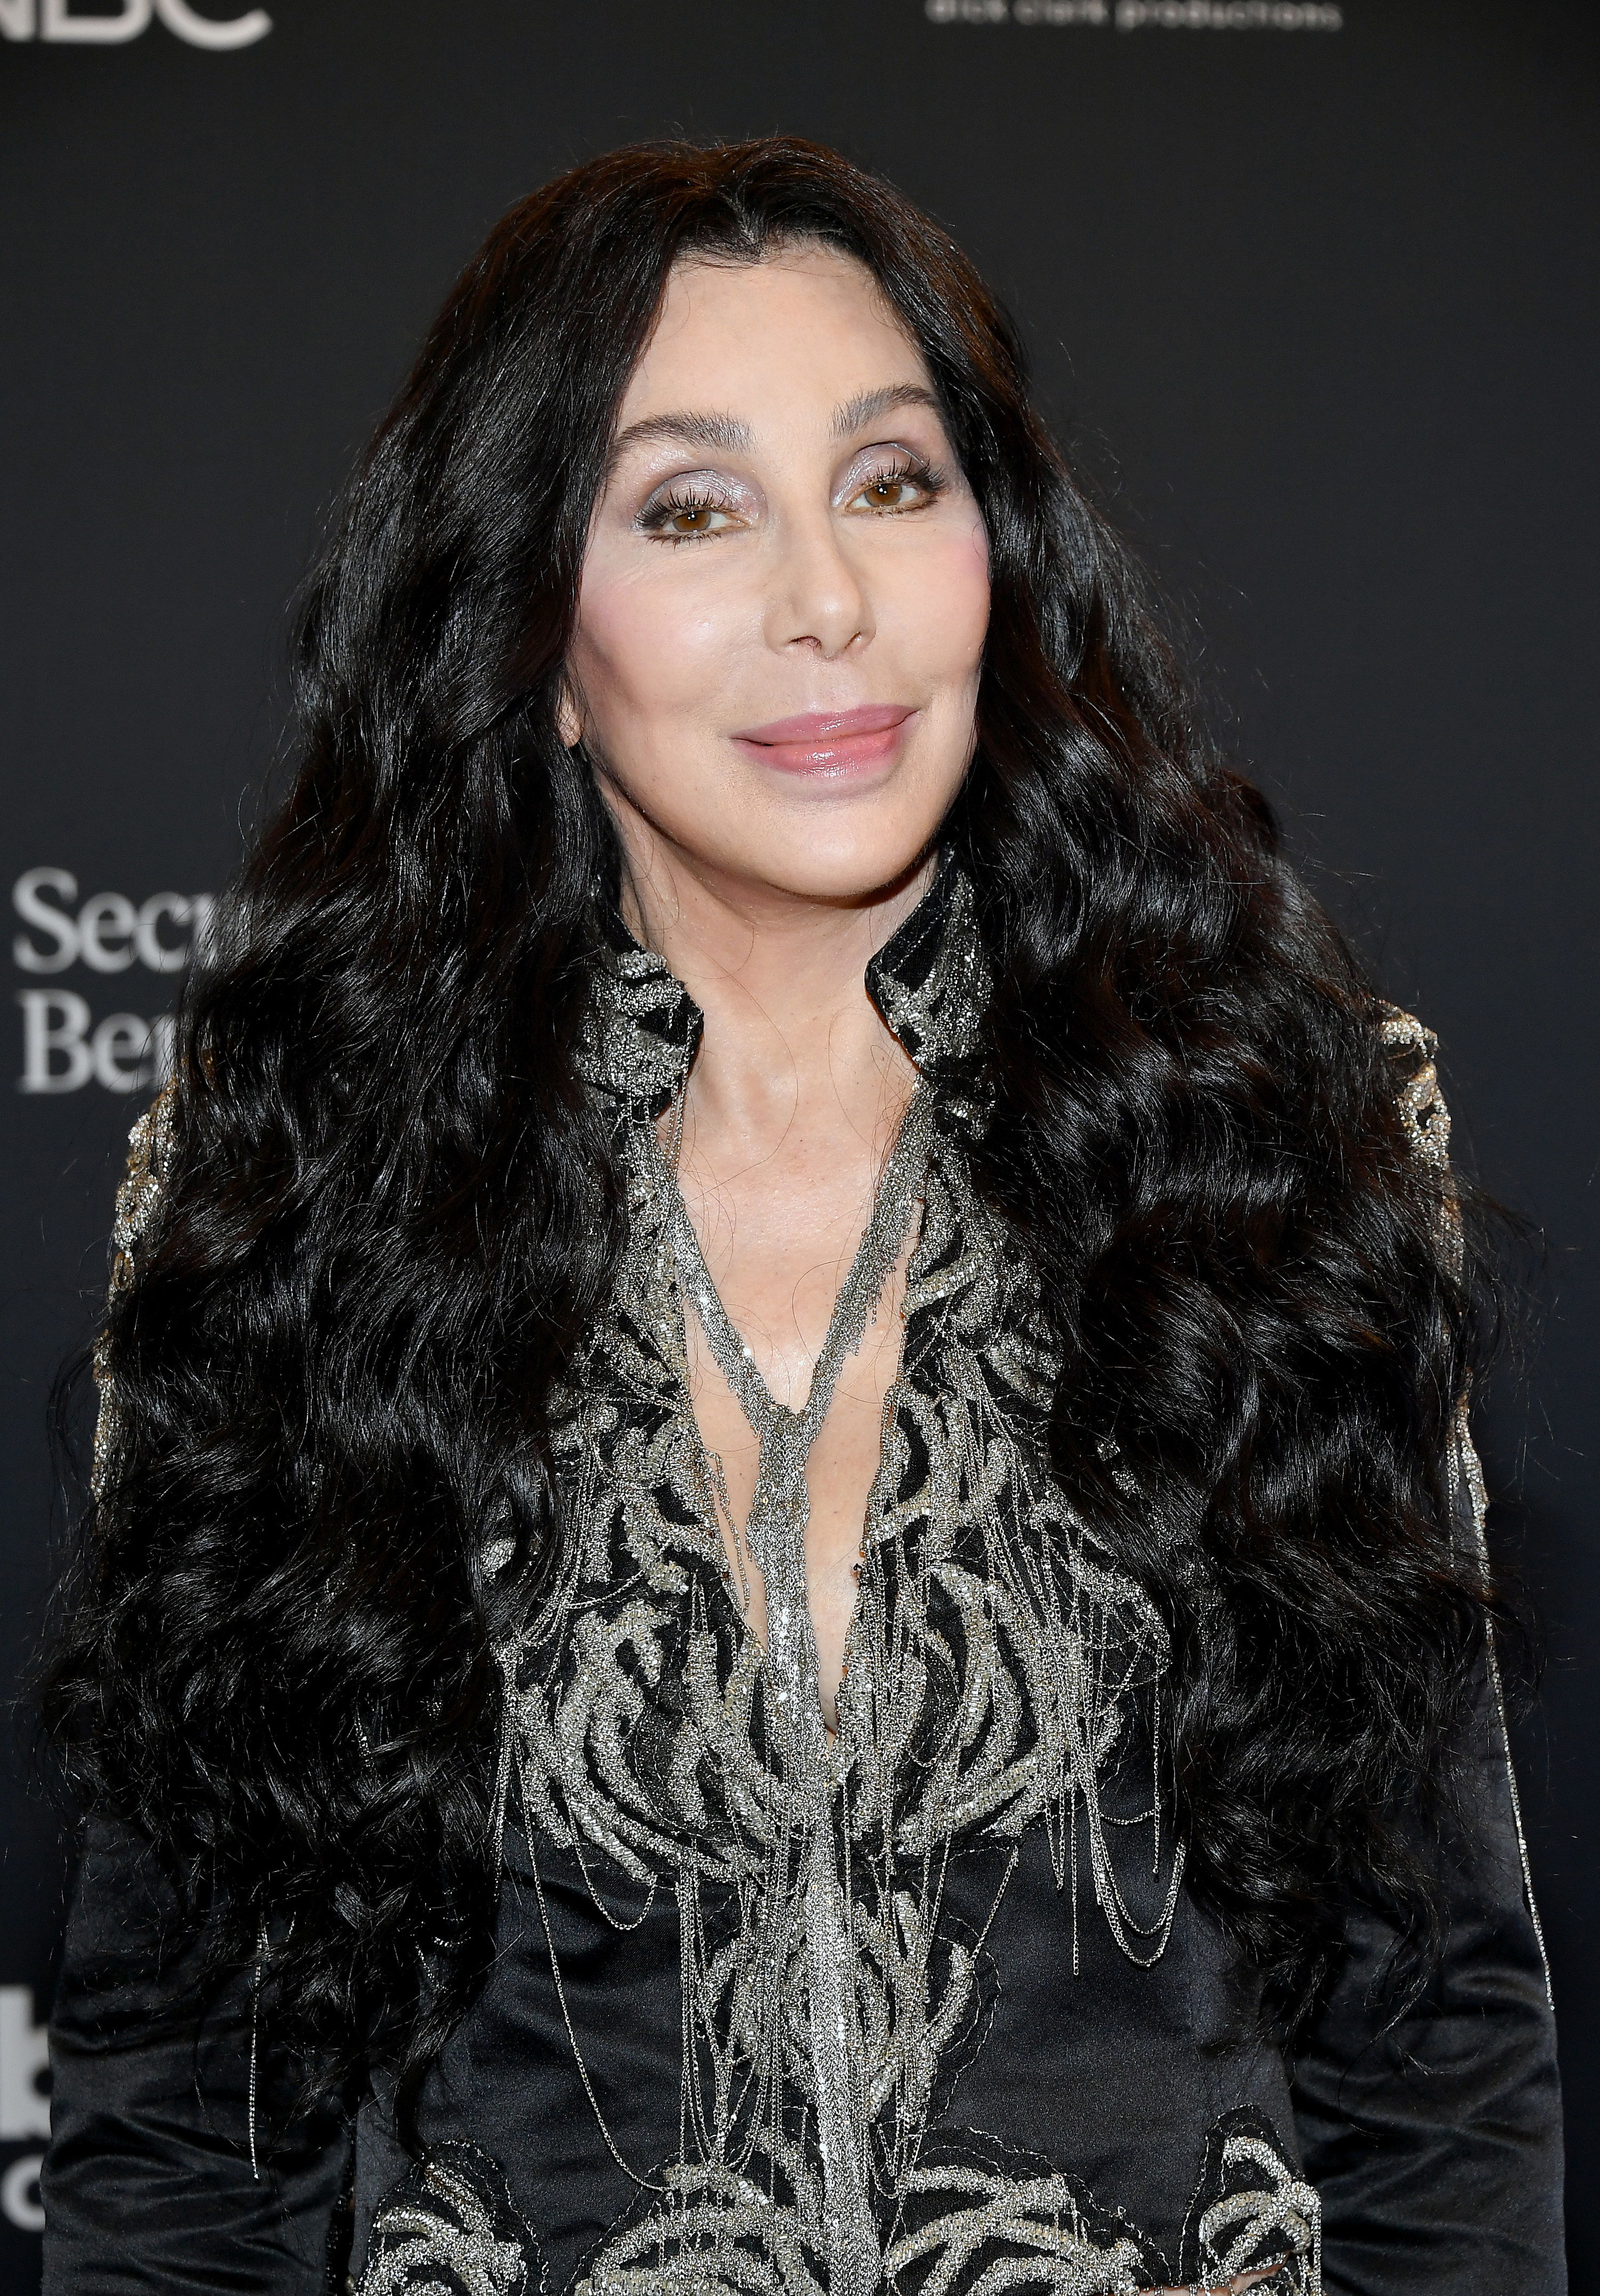 In this image released on October 14, Cher poses backstage at the 2020 Billboard Music Awards, broadcast on October 14, 2020